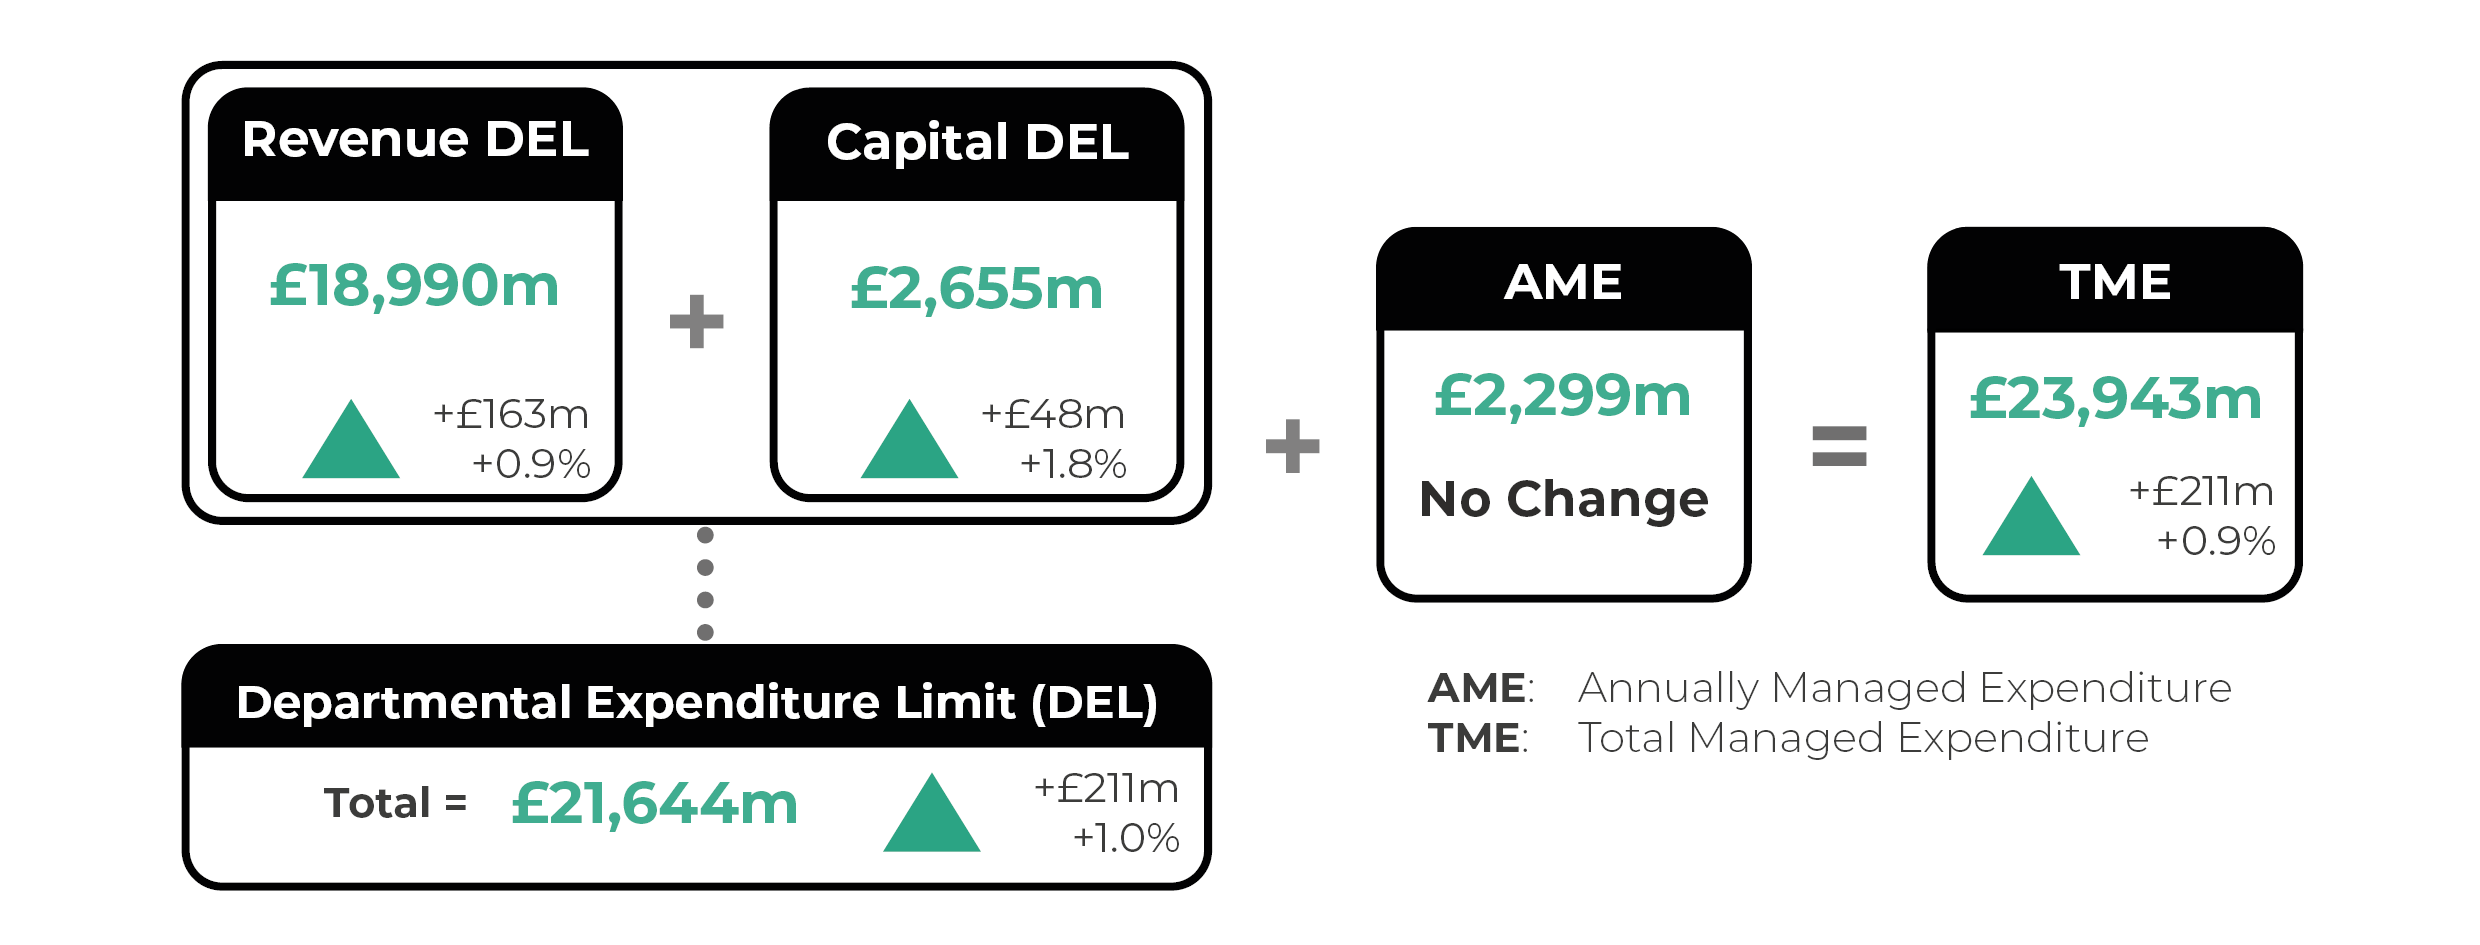 Revenue Departmental Expenditure Limit (DEL): £18,990m (up by £163m or 0.9%). Capital DEL: £2,655m (up by £48m or 1.8%). Total DEL: £21,644m (up by £211m or 1.0%). Annually Managed Expenditure (AME): £2,299m (no change). Total Managed Expenditure (TME): £23,943m (up by £211m or 0.9%).